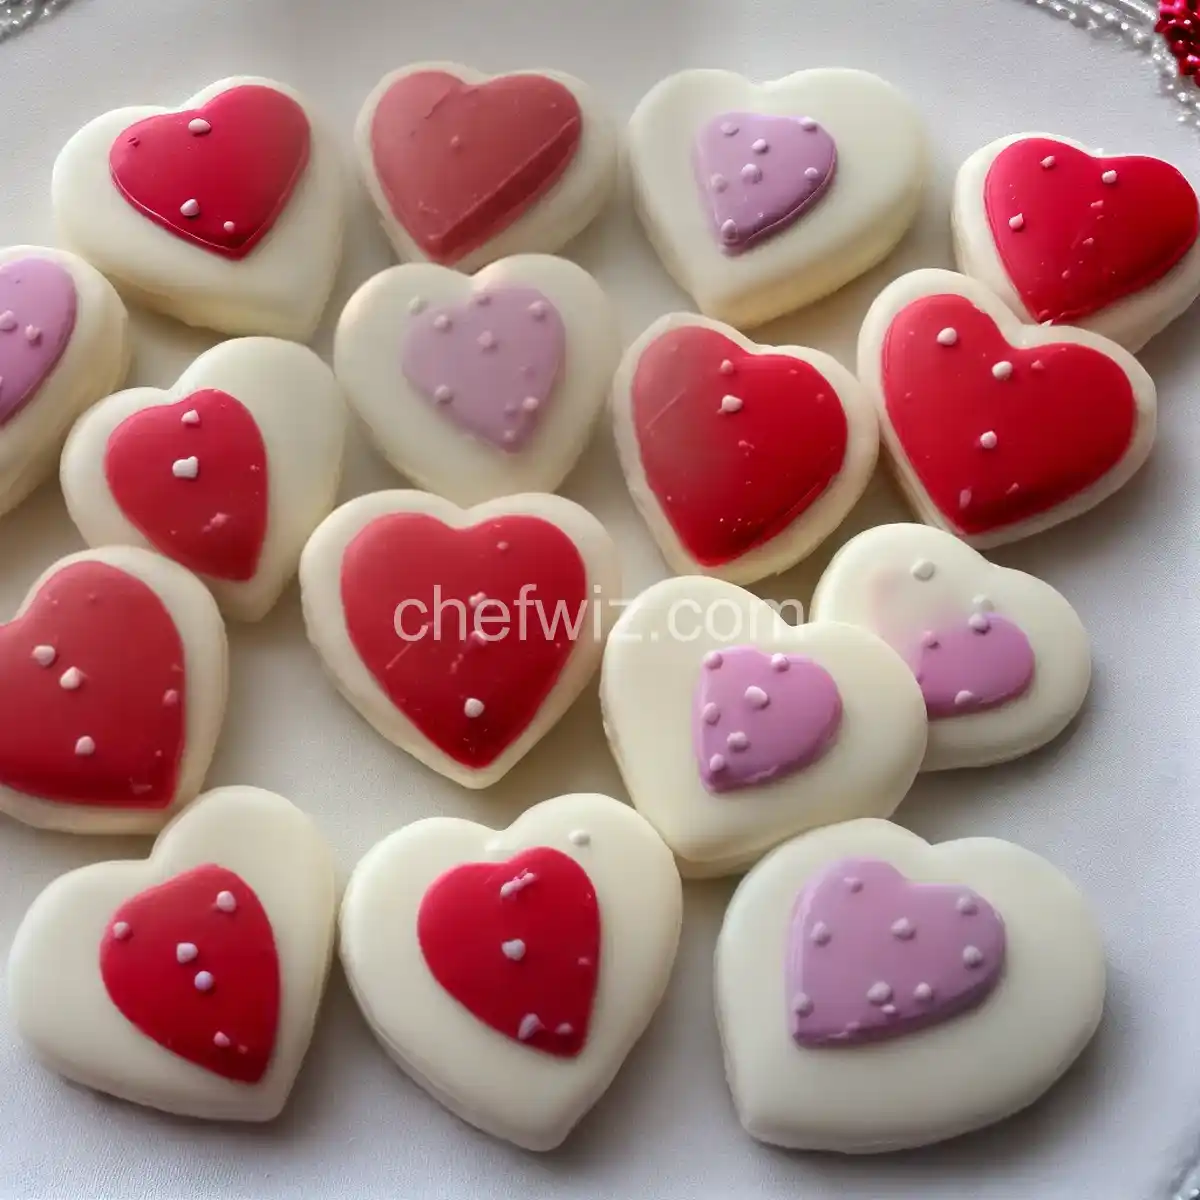 Homemade Conversation Hearts Recipe Recipes Food Cooking Eating Dinner Ideas